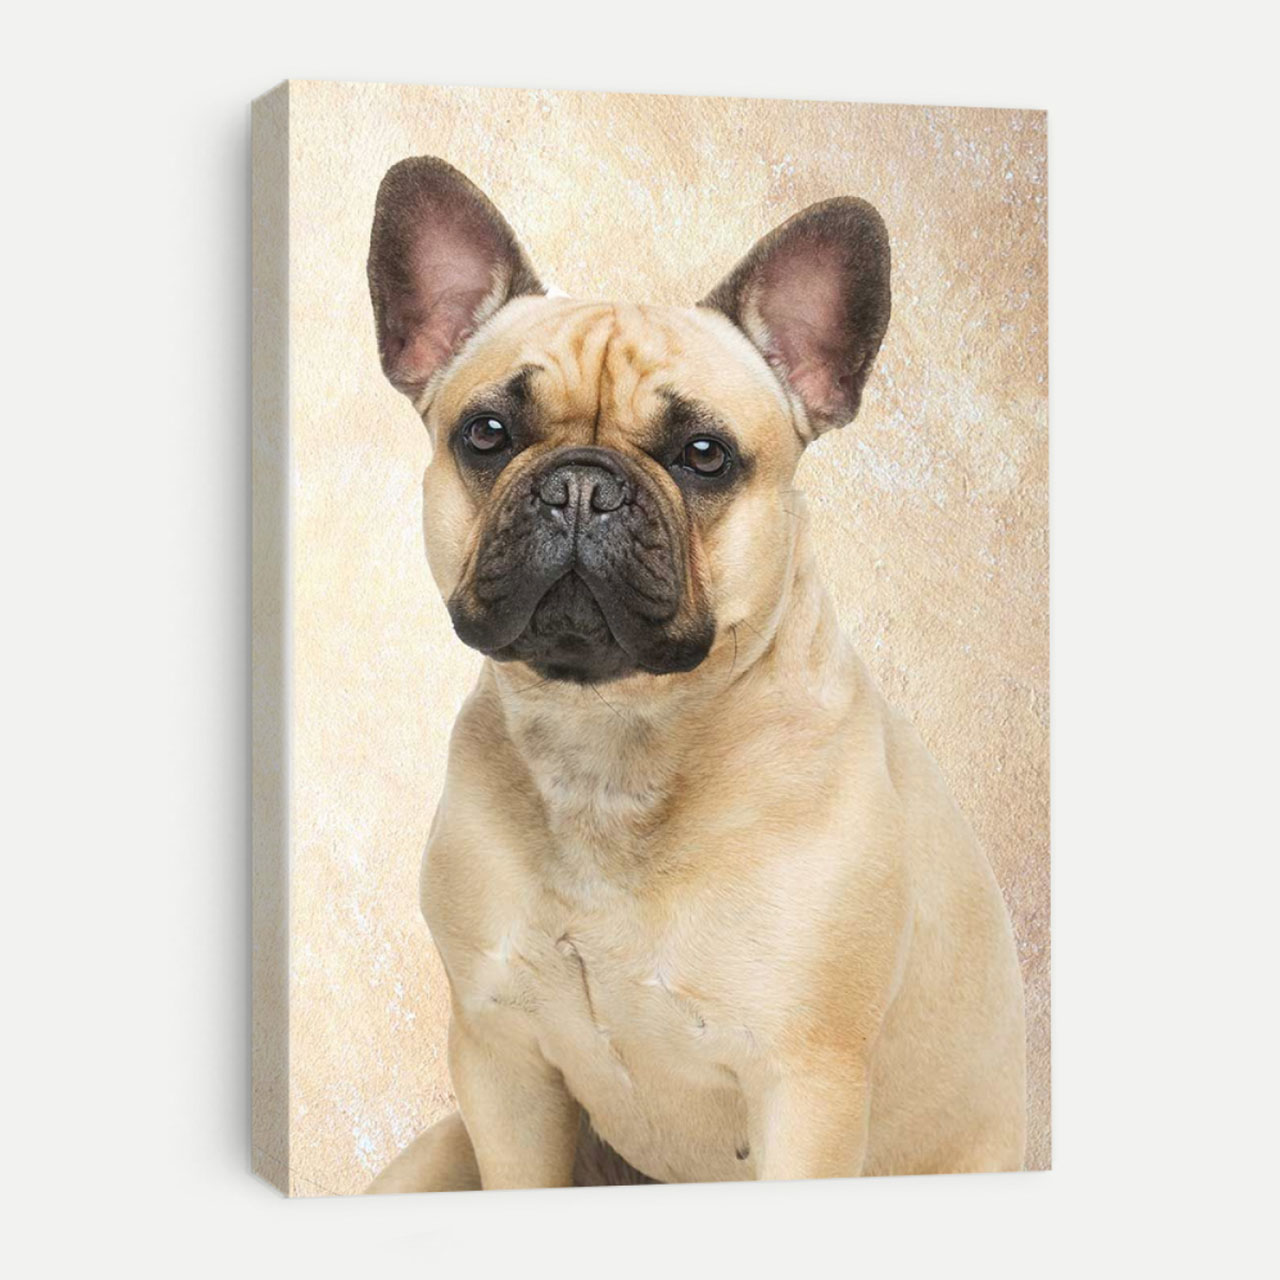 A canvas print depicting a photo of a French Bulldog